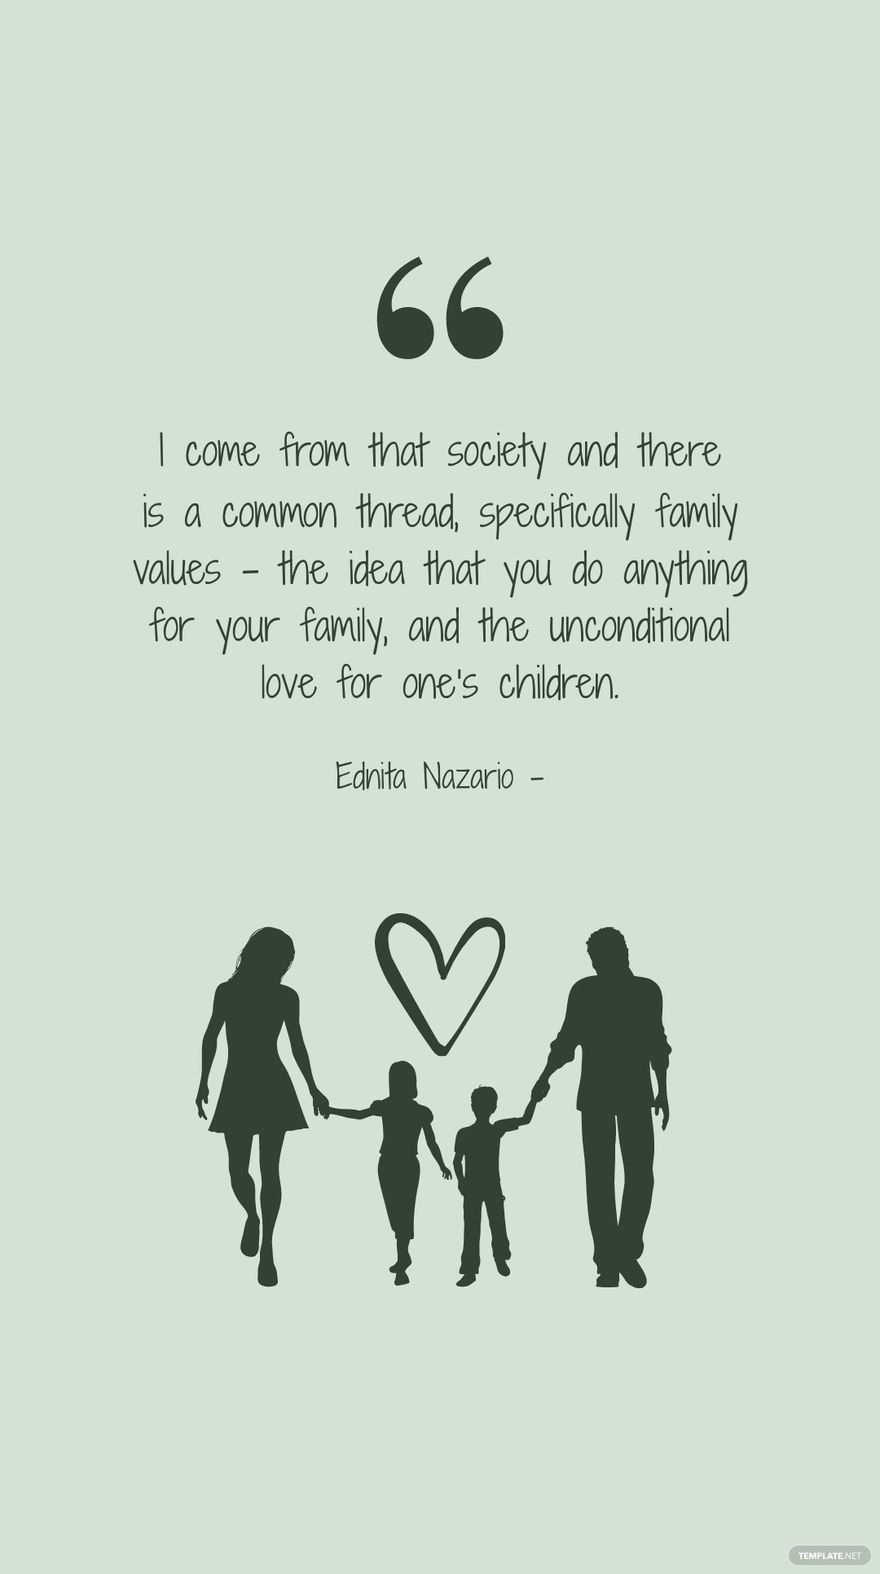 Ednita Nazario - I come from that society and there is a common thread, specifically family values - the idea that you do anything for your family, and the unconditional love for one's children.